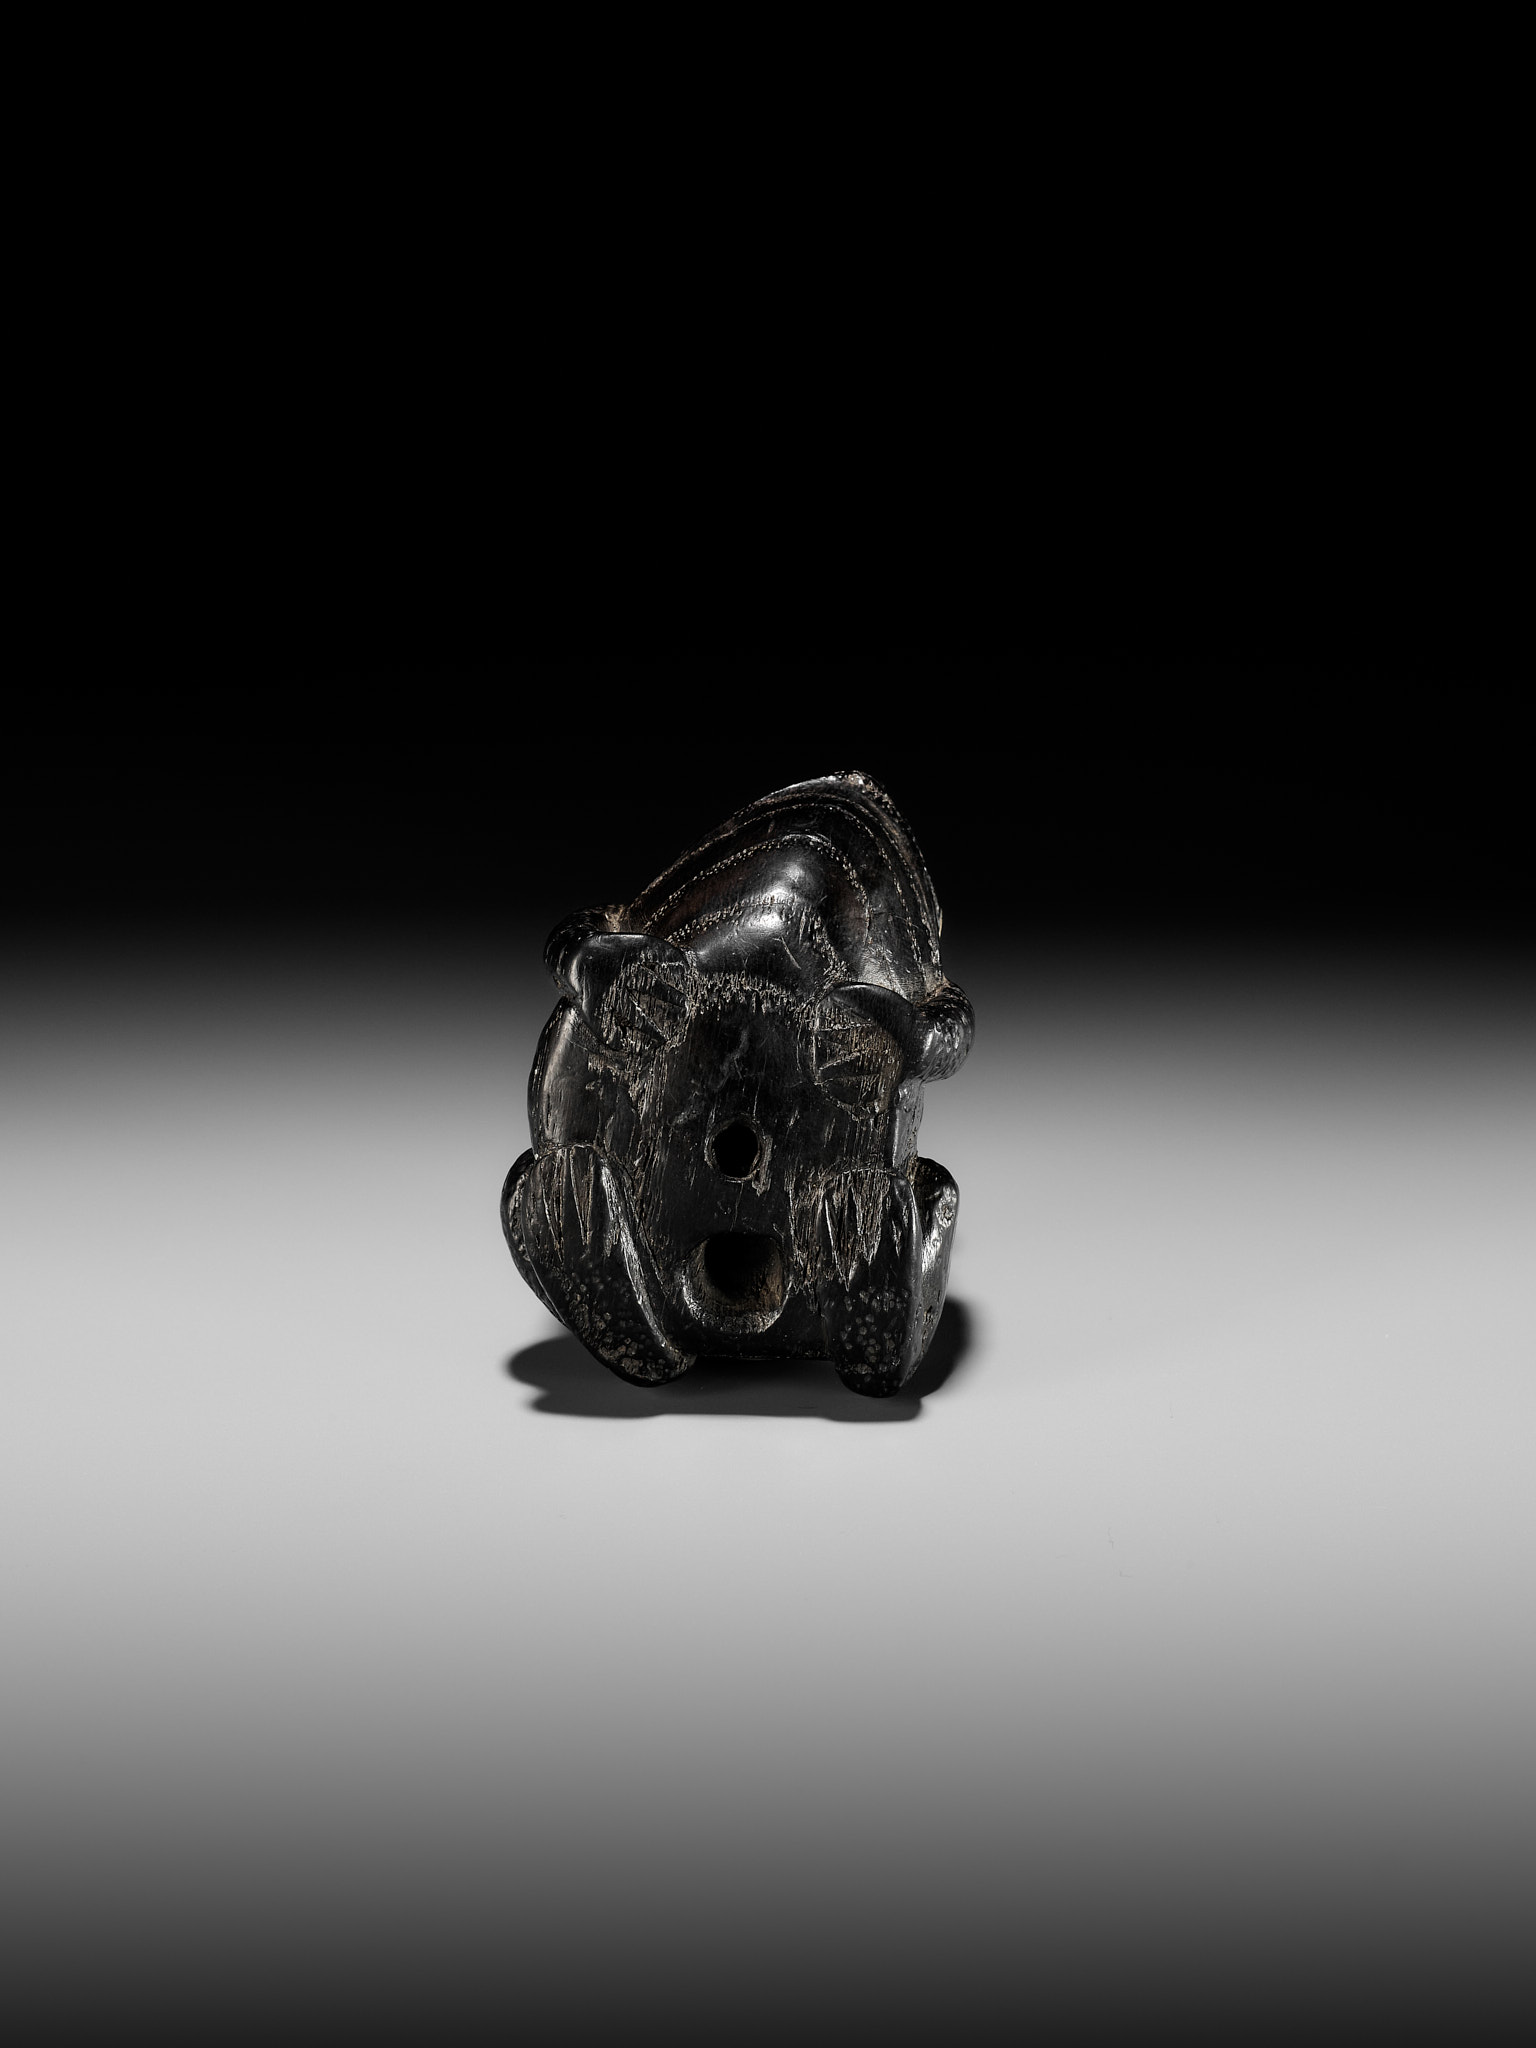 AN OLD AND RUSTIC EBONY WOOD NETSUKE OF A TOAD - Image 9 of 9